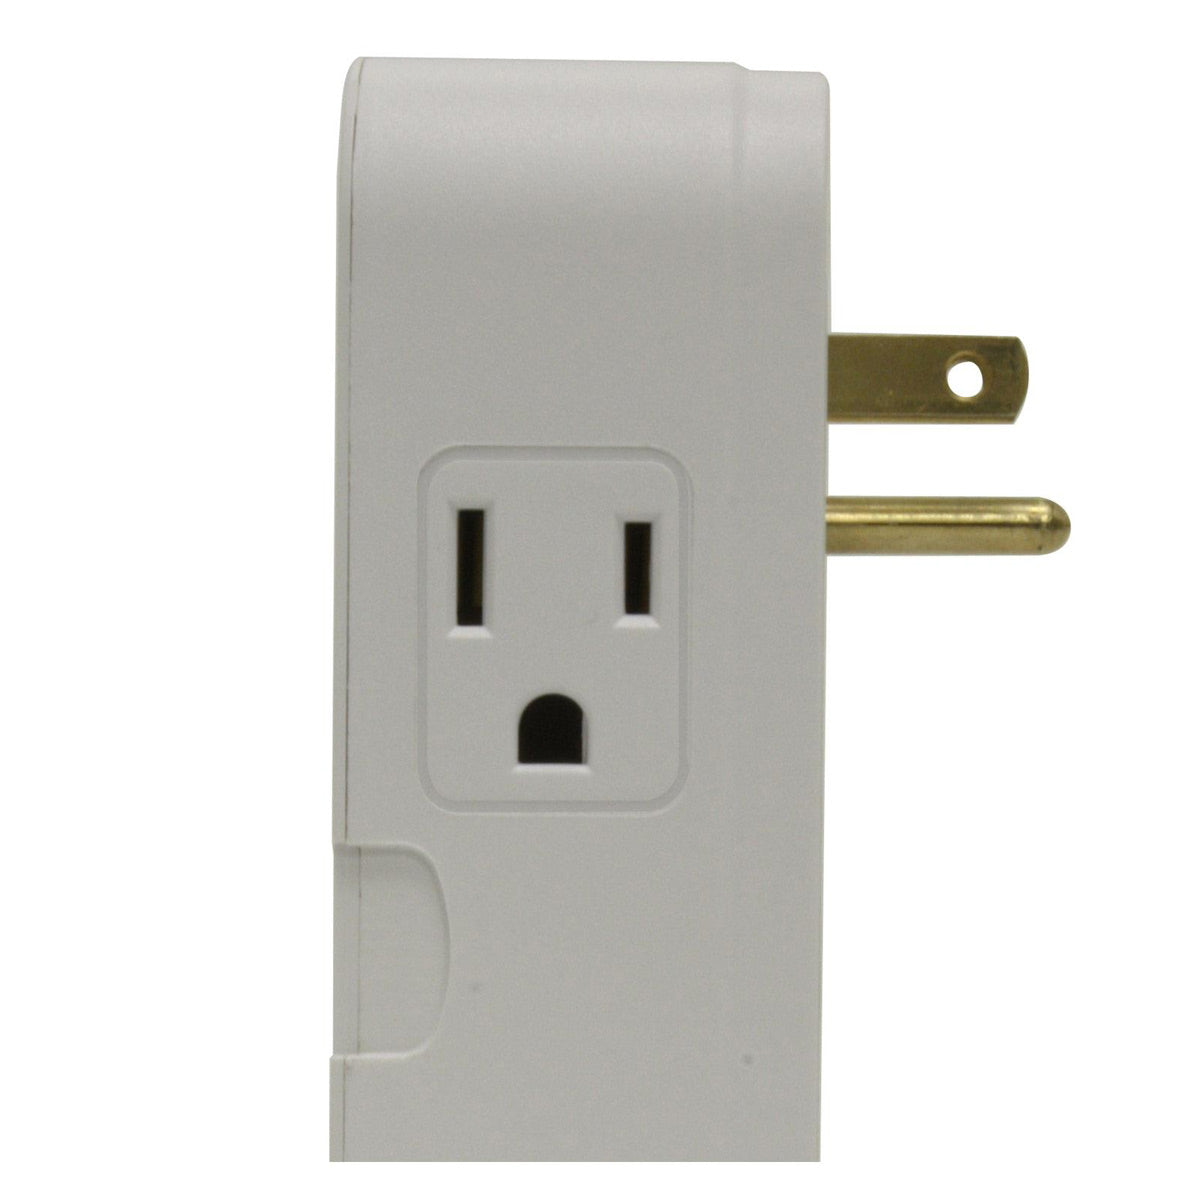 Panamax MD2 2-Outlet Surge Suppressor with LED Diagnostic Lights